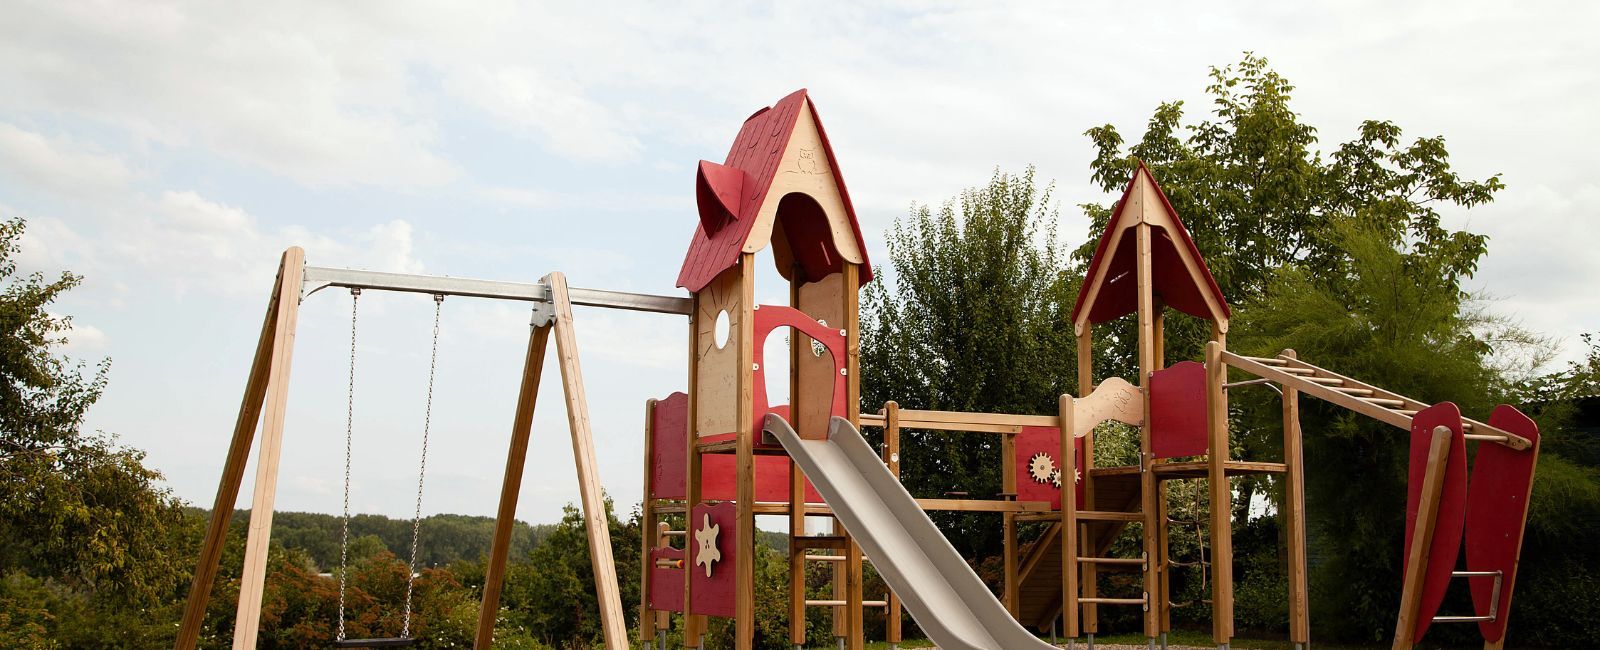 Image of swings, with wooden poles, a wooden playhouse with a red roof and a metal slide from the playhouse.